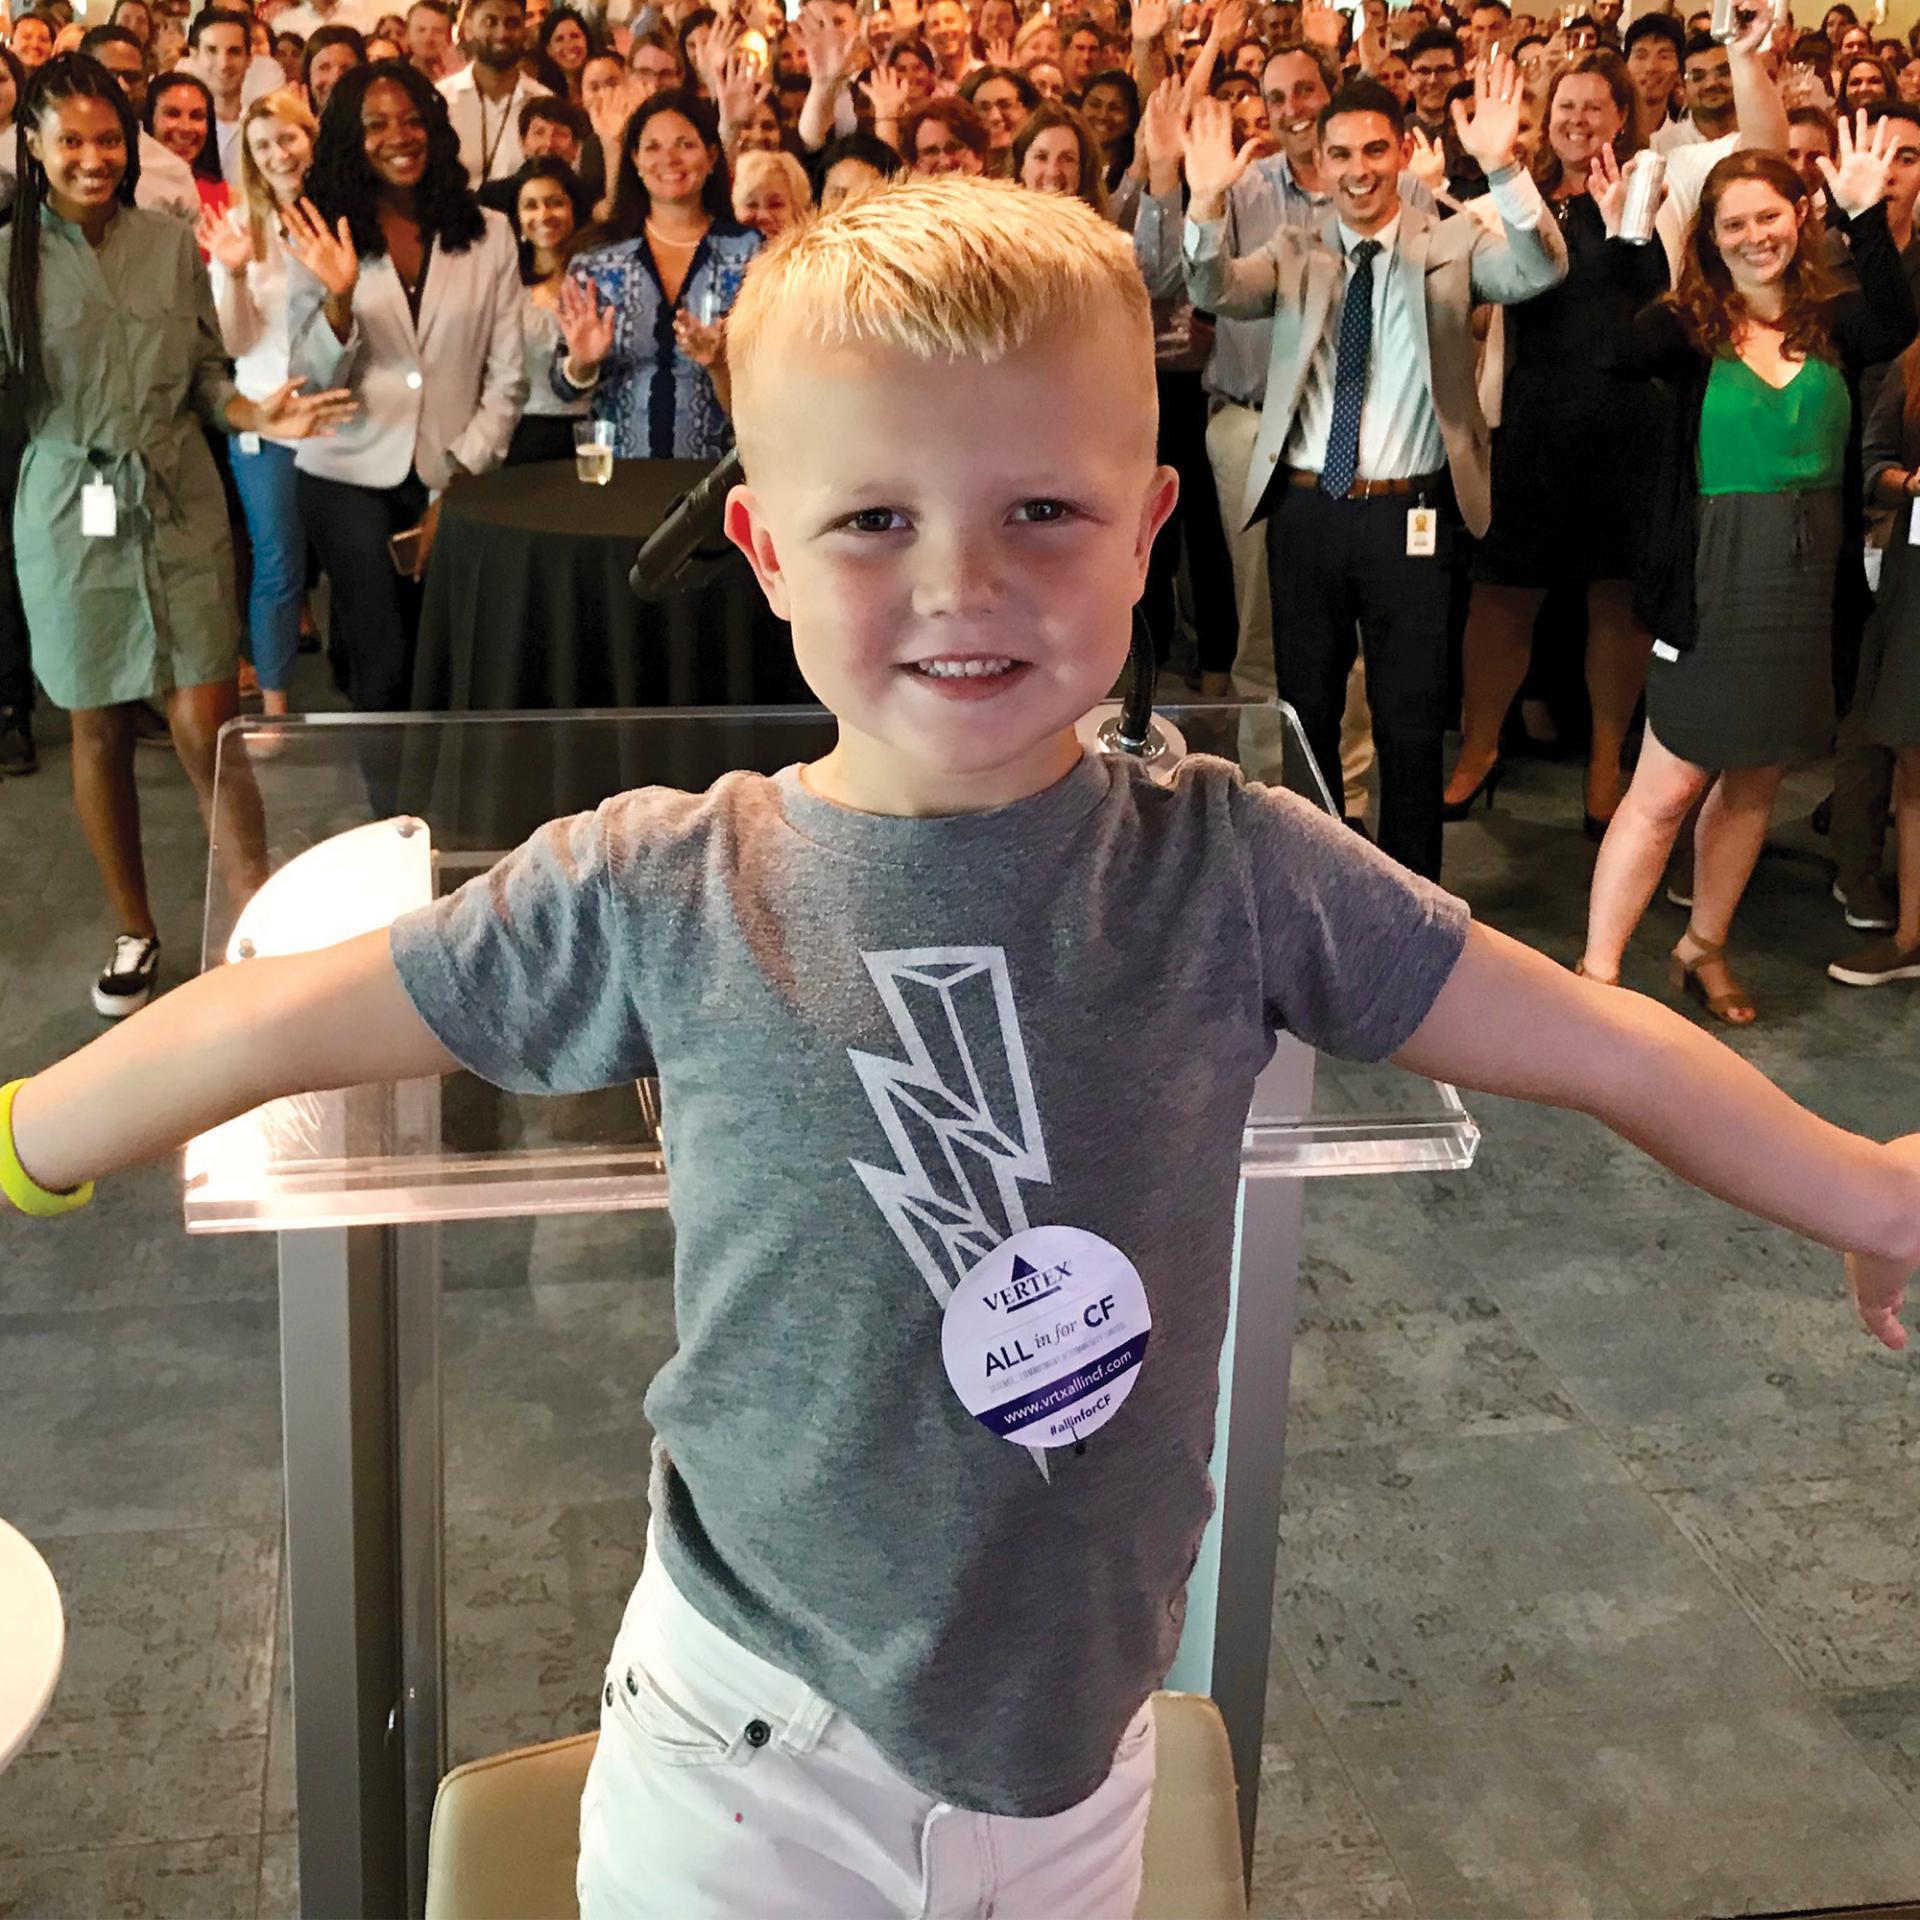 An image of a boy standing in front of a crowd of Vertex employees